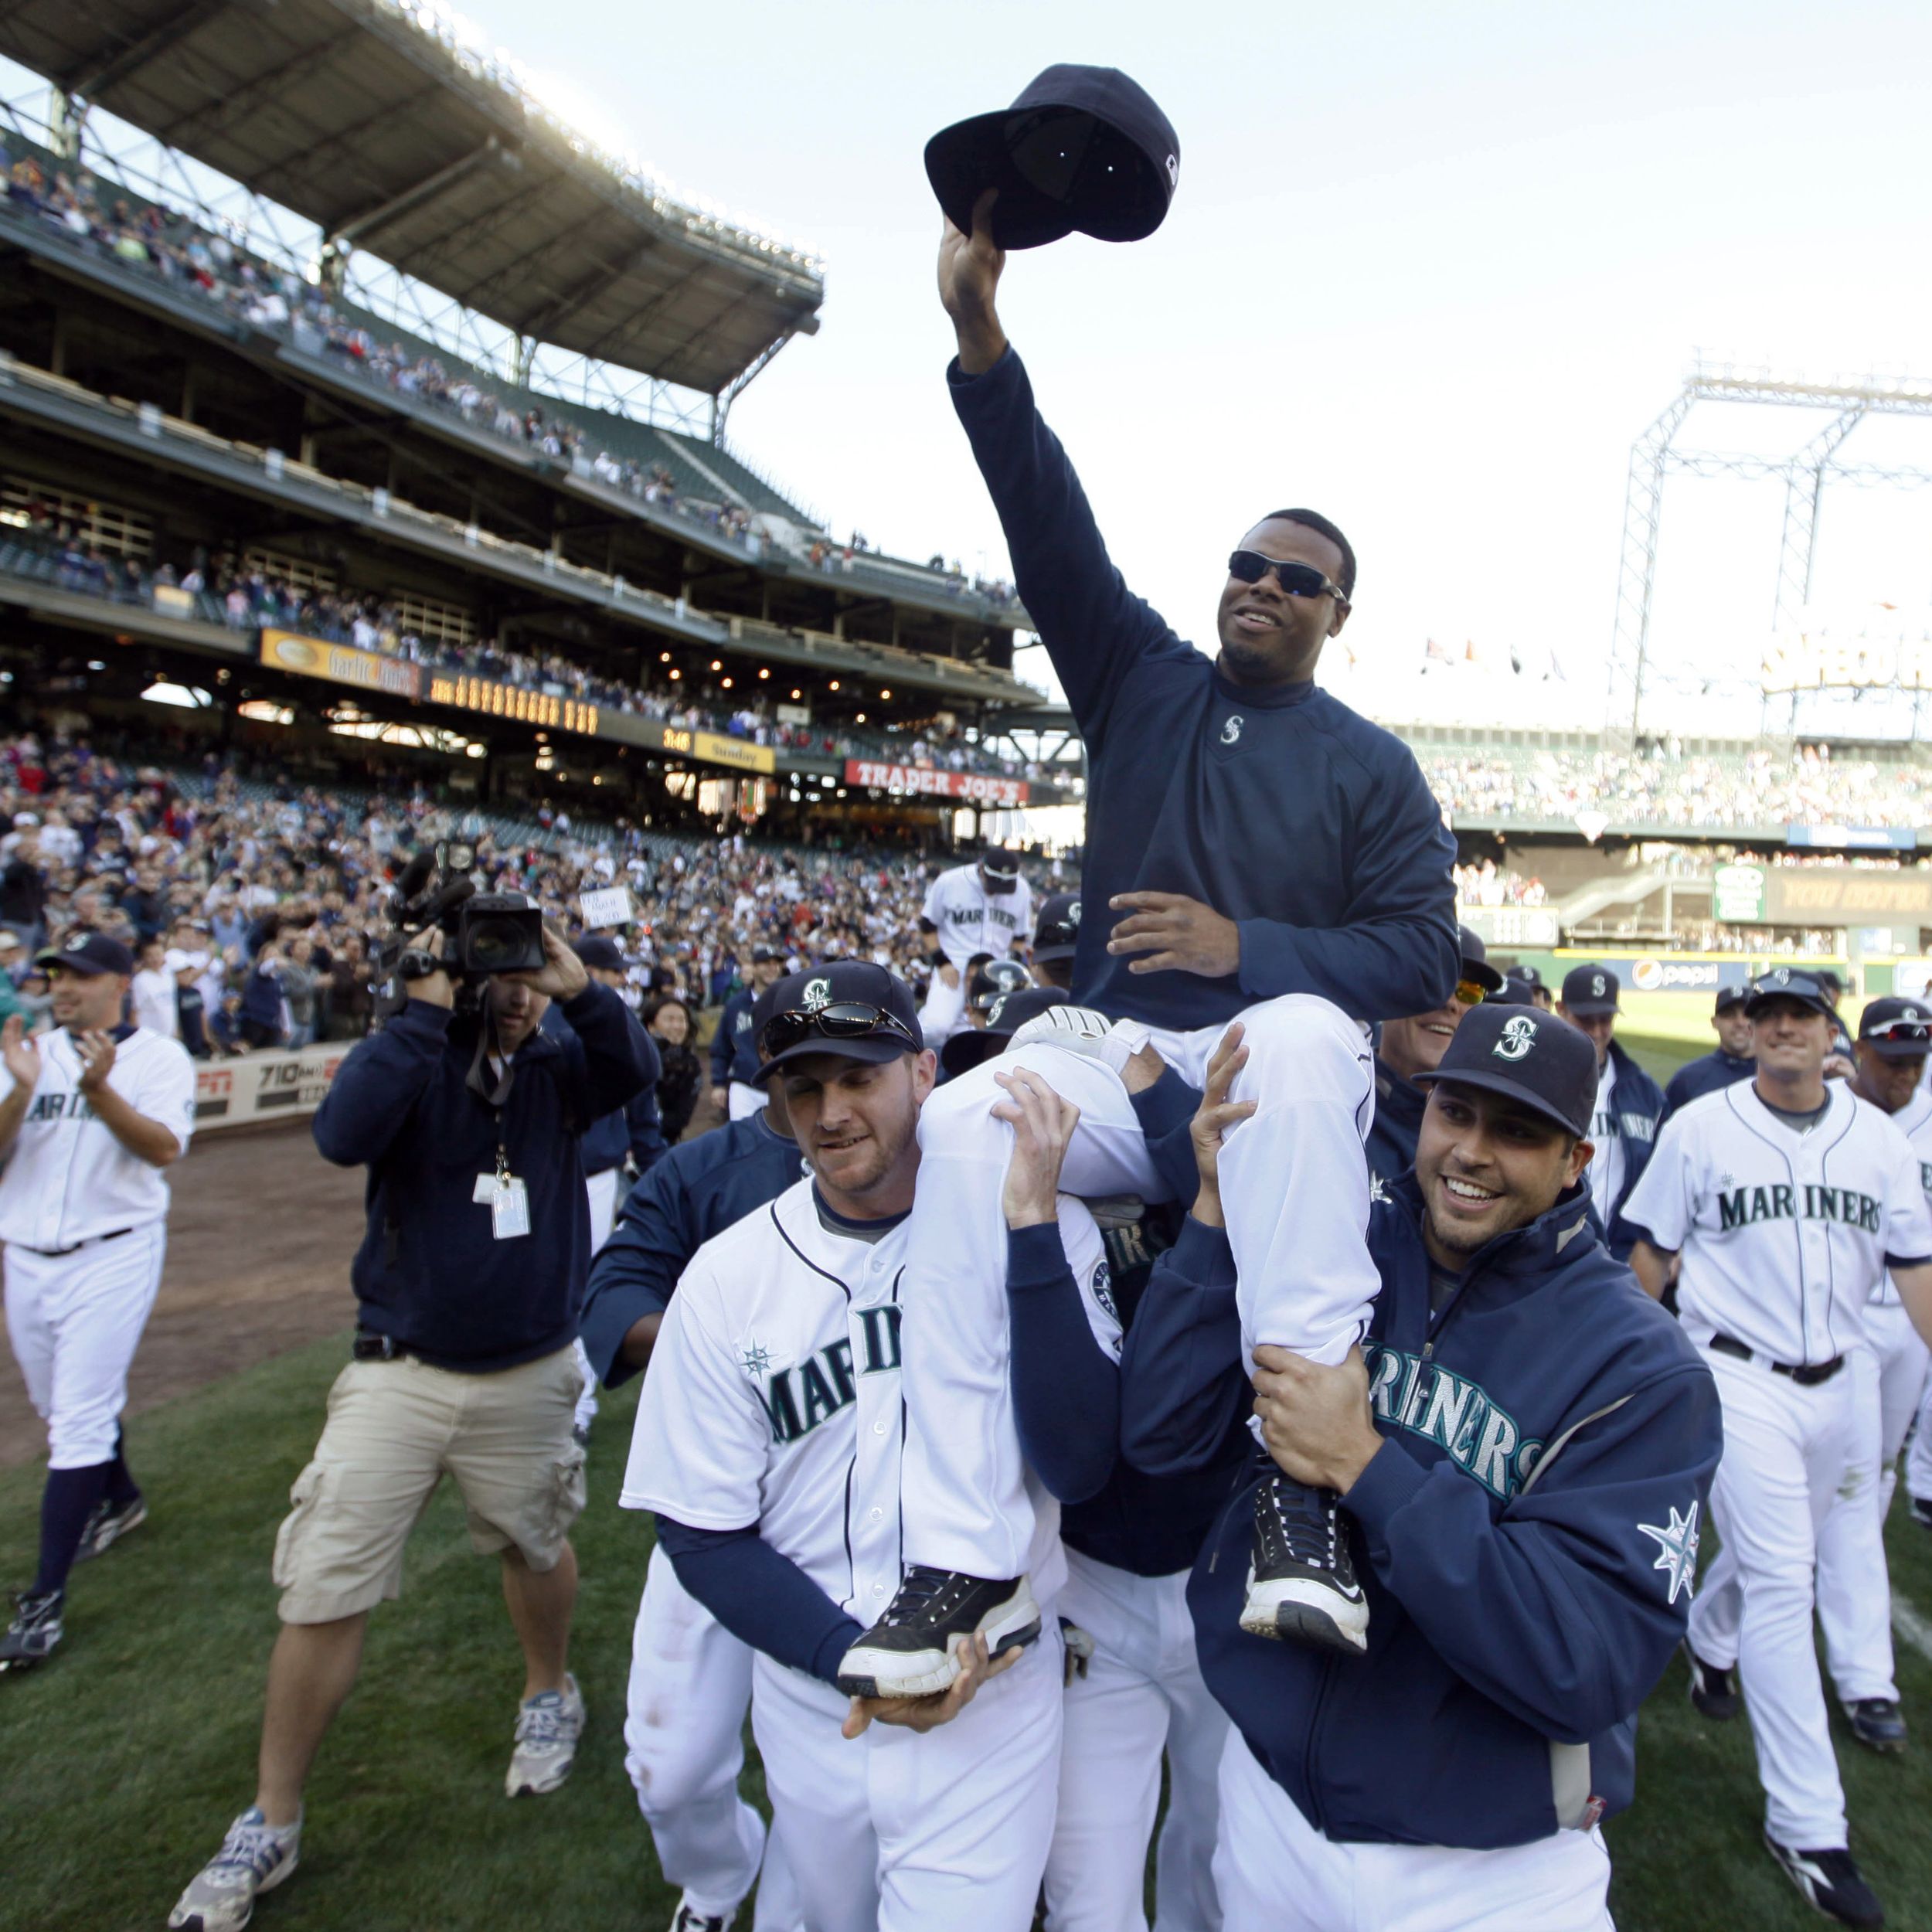 Ken Griffey Jr.'s time may be short